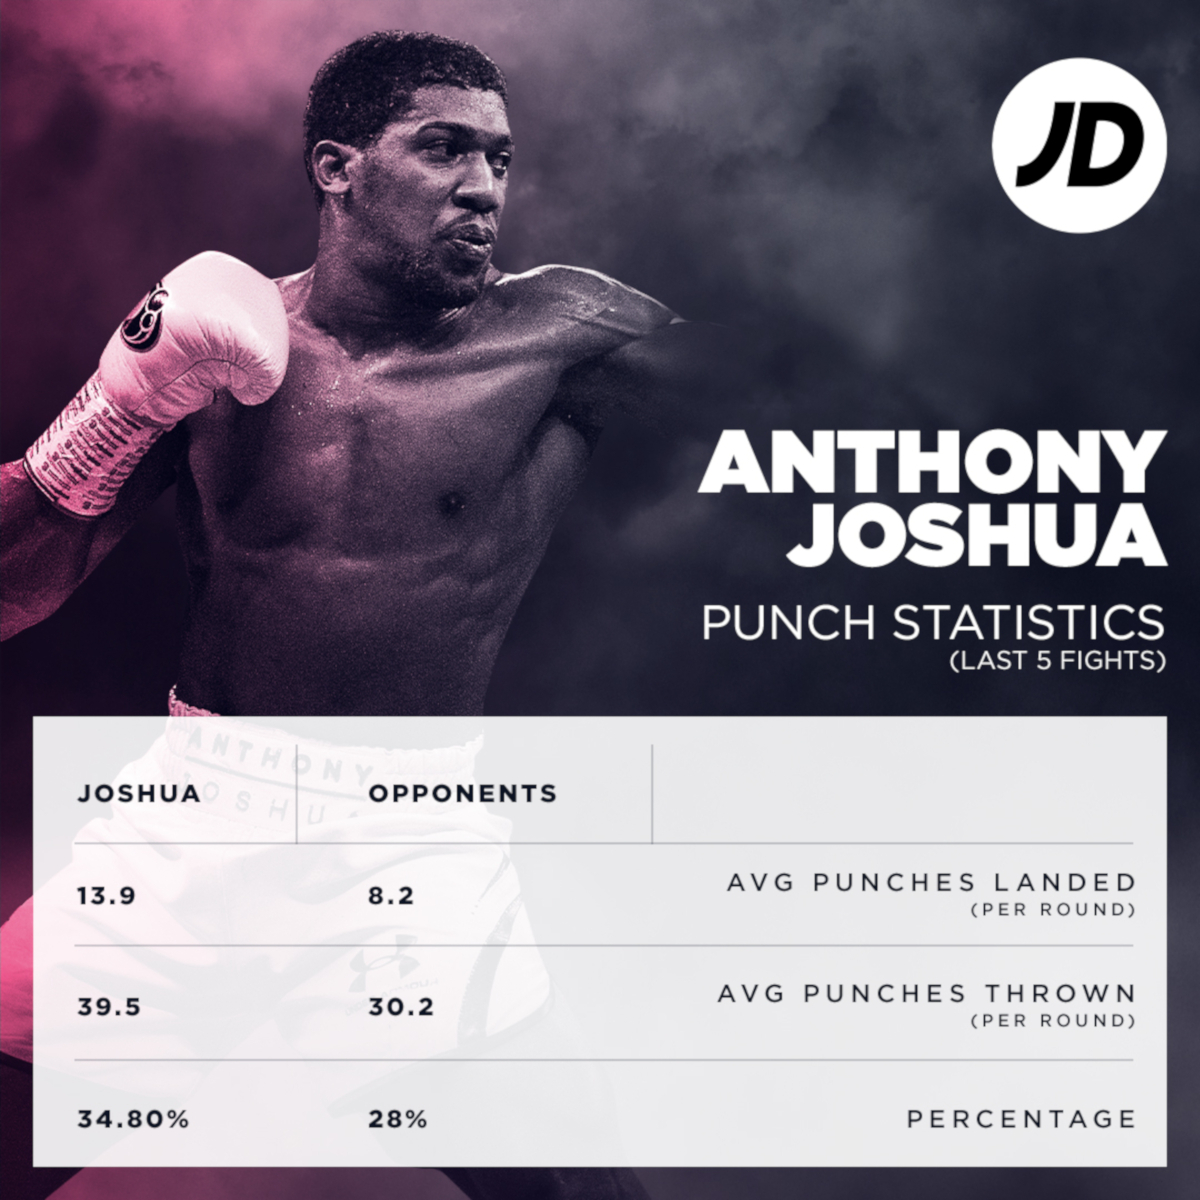 Anthony Joshua recent punch stats by JD Sports